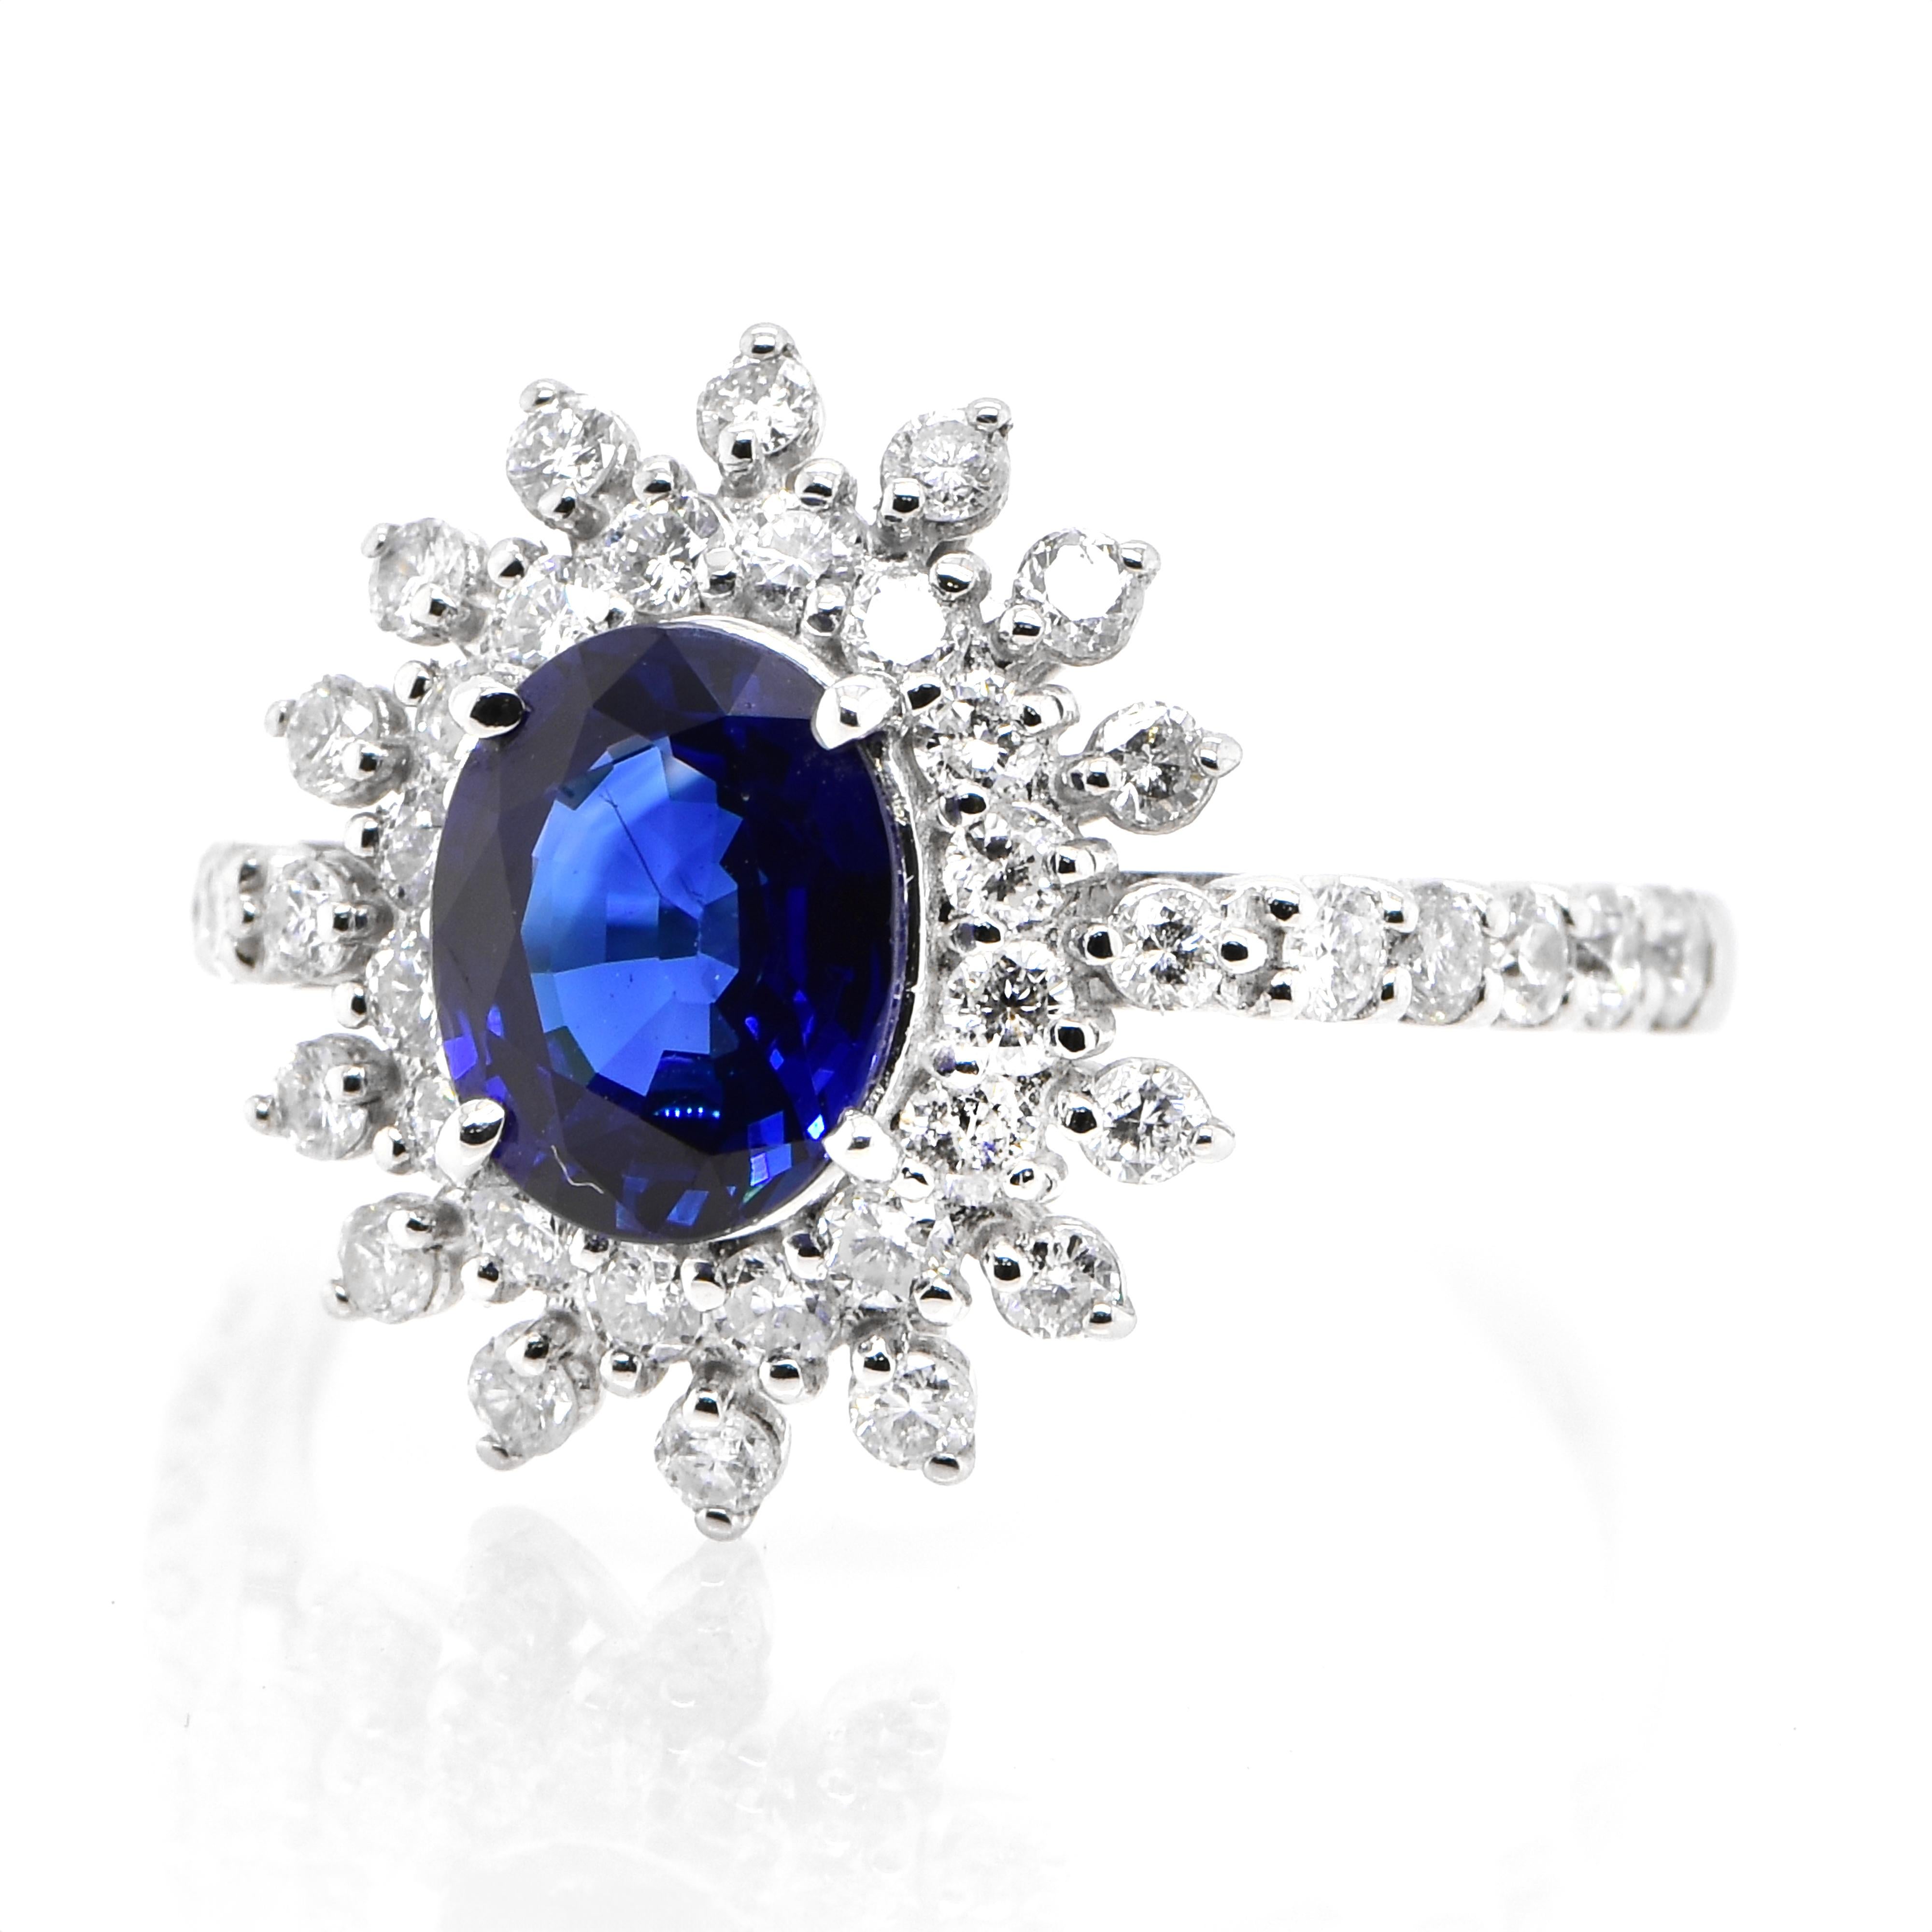 A beautiful ring featuring 1.579 Carat Natural Sapphire and 0.78 Carats Diamond Accents set in Platinum. Sapphires have extraordinary durability - they excel in hardness as well as toughness and durability making them very popular in jewelry.